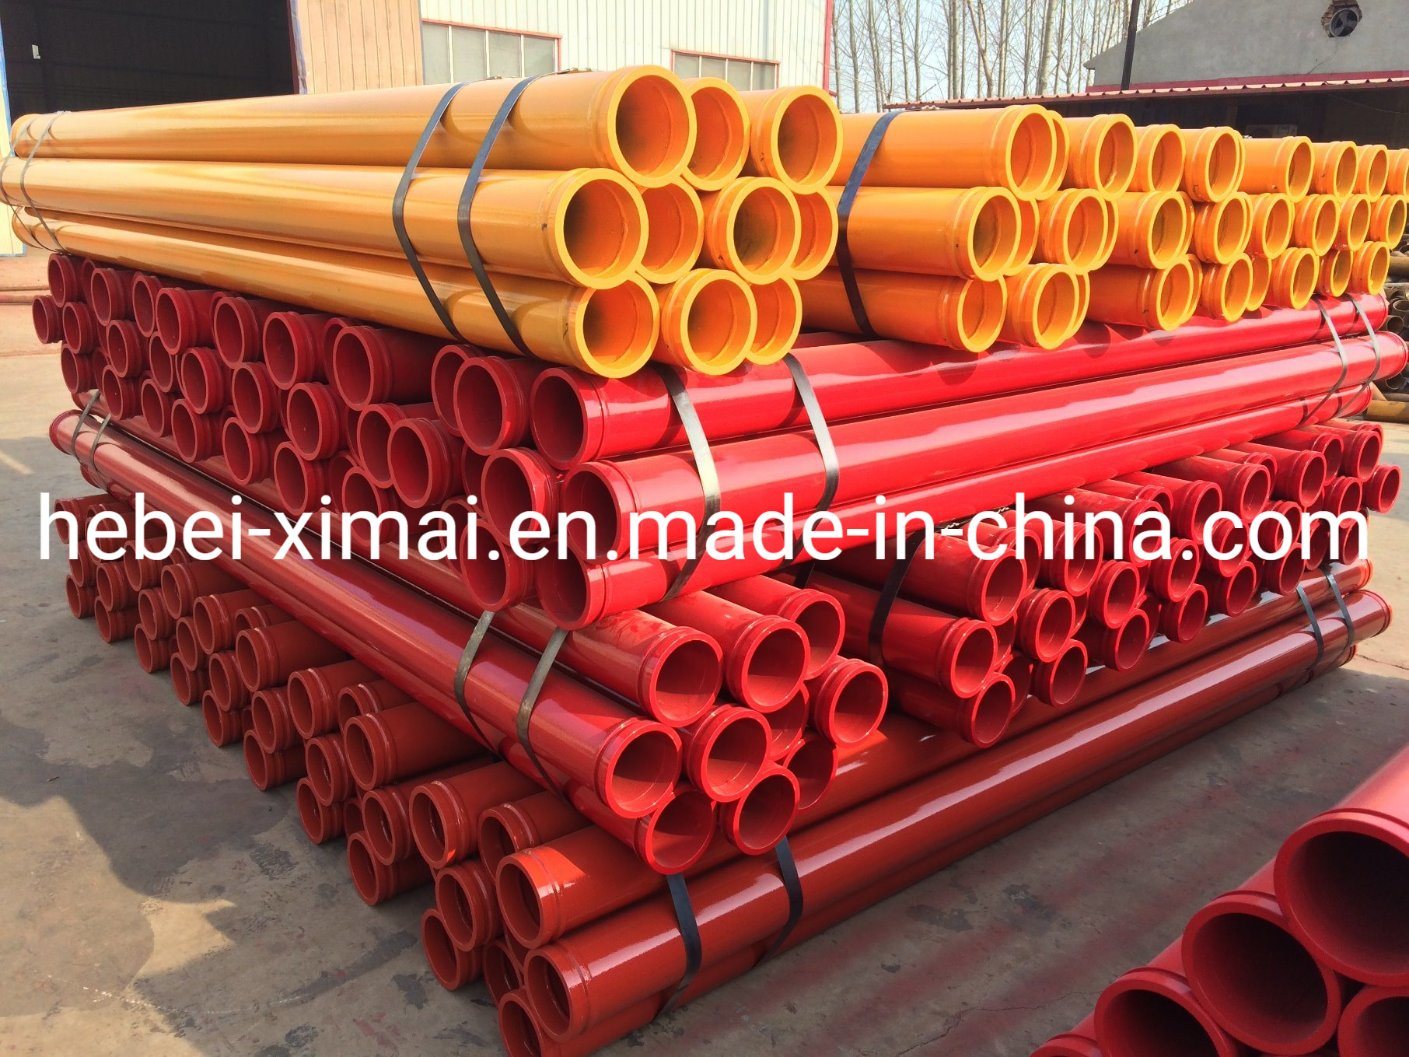 Cheap PriceList for PM S pipe - Hebei Ximai Machinery Hardened Single Wall Boom Pipe (DN125 6.35mm) – Ximai